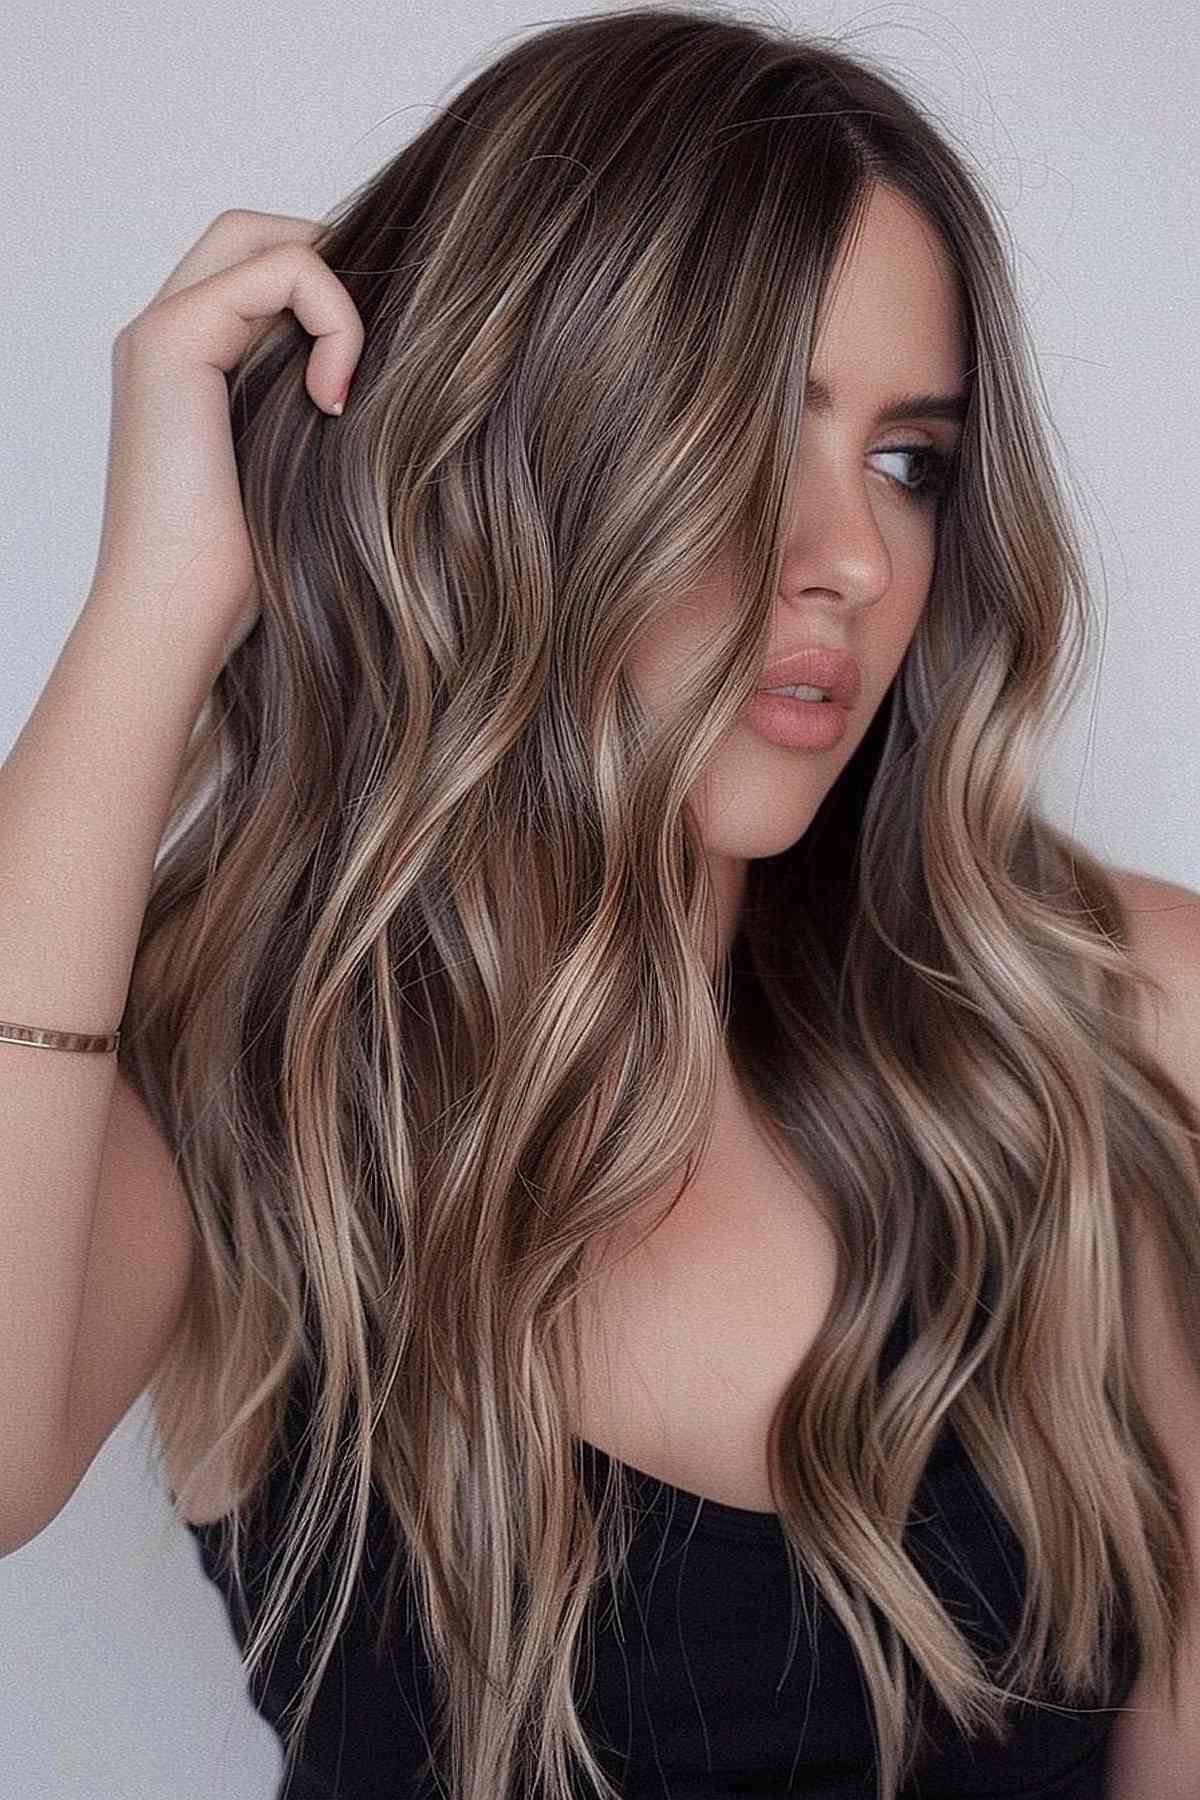 Long, wavy hair with mushroom brown and blonde highlights underneath, creating a playful, dynamic contrast and adding volume. 